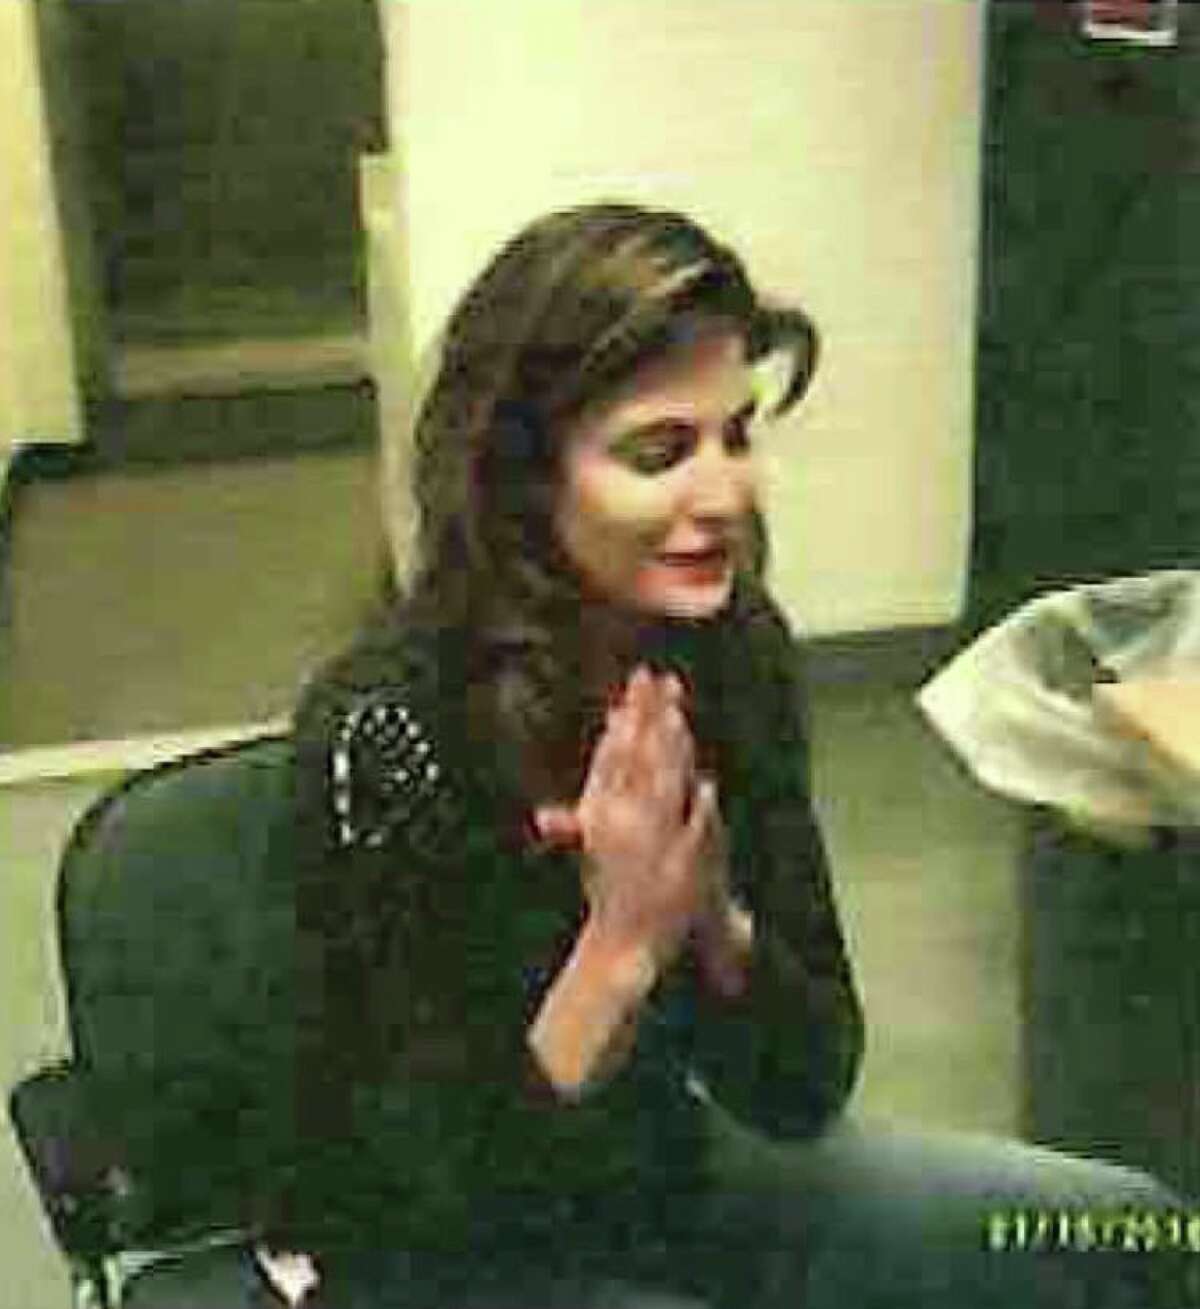 GREENWICH, CT - JANUARY 15: (EDITORS NOTE: BEST QUALITY AVAILABLE) In this handout photo provided by the Connecticut State Police, Model/actress Stephanie Seymour is pictured after her arrest on January 15, 2016 in Greenwich, Connecticut. Seymour was charged with DUI and is scheduled to appear in court in February. (Photo by Connecticut State Police via Getty Images)